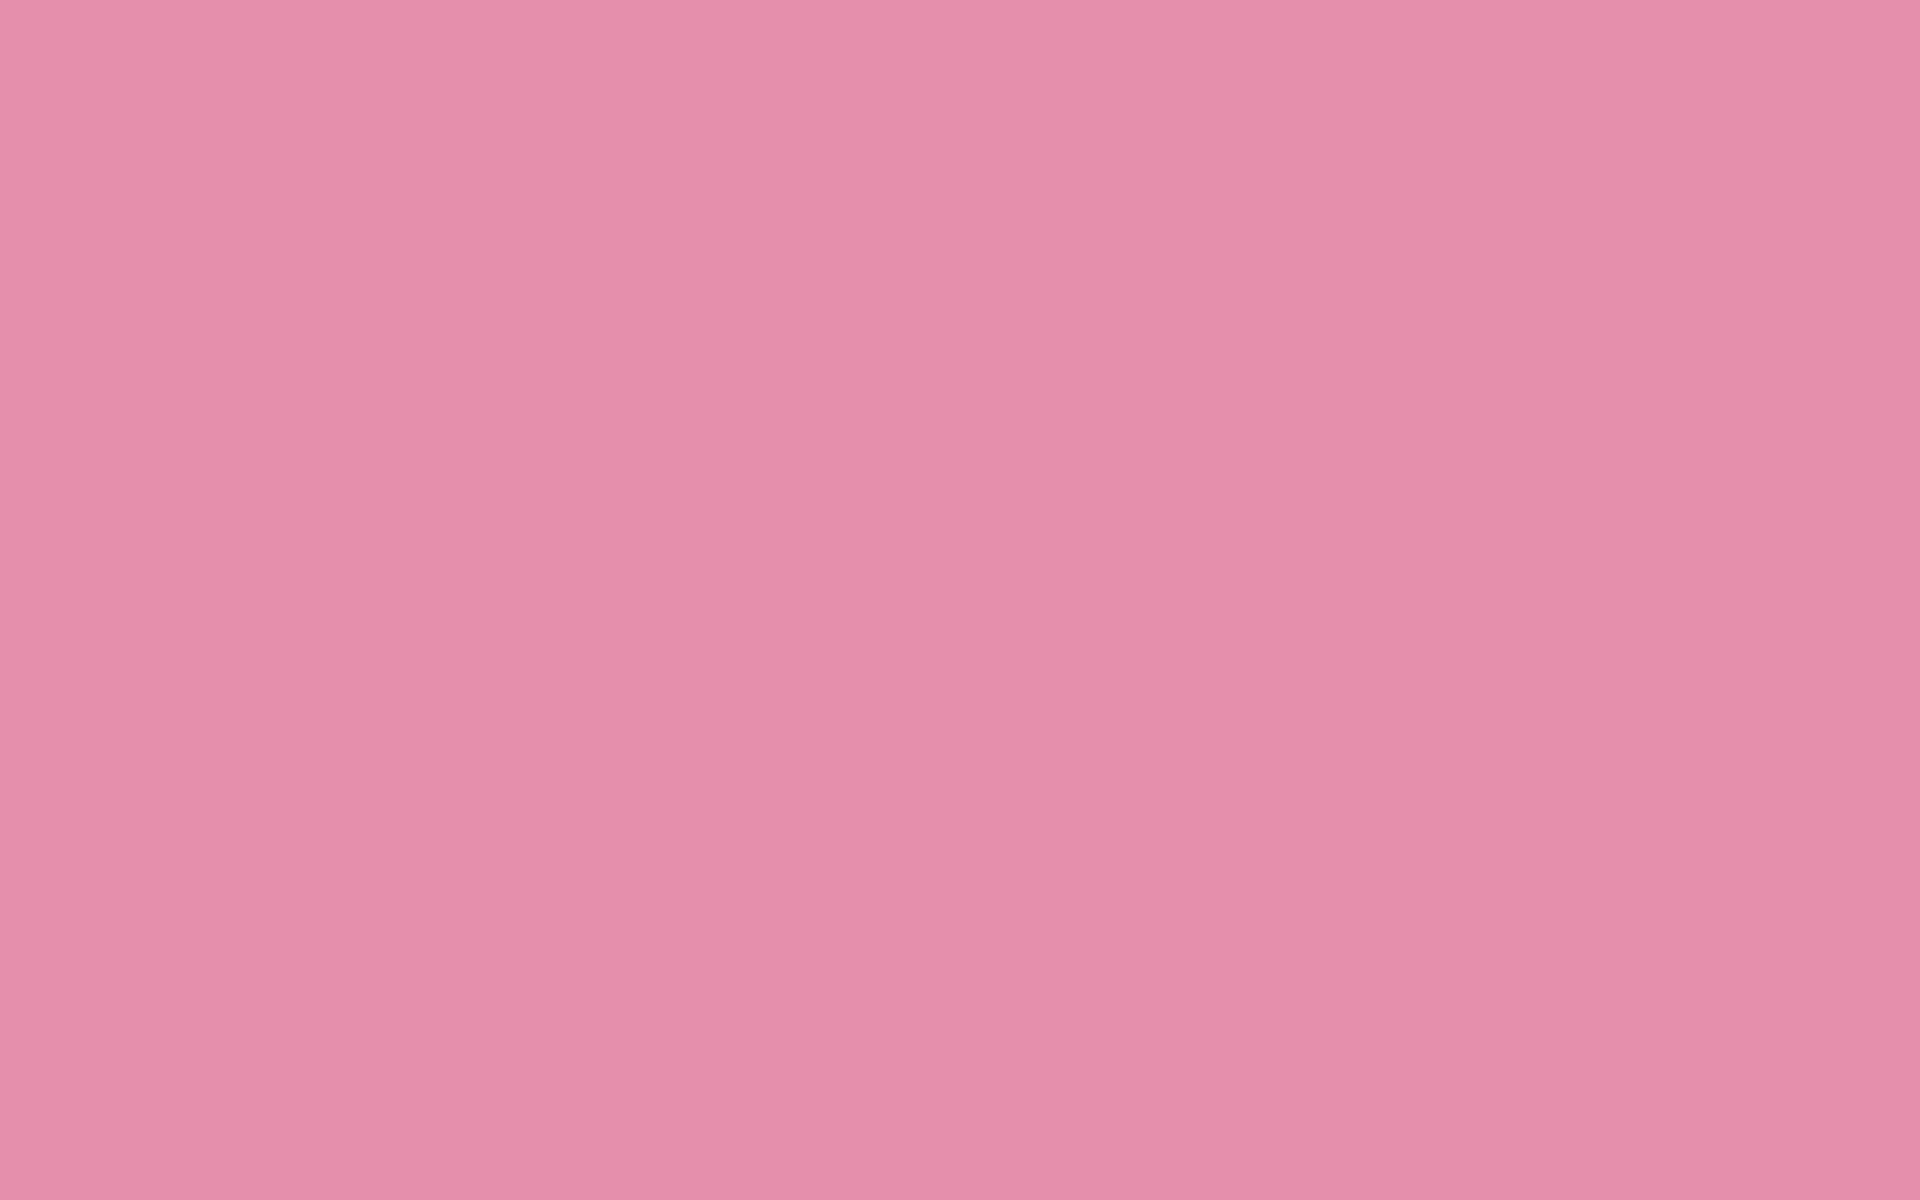 Pin Light pink backgrounds for tumblr pictures